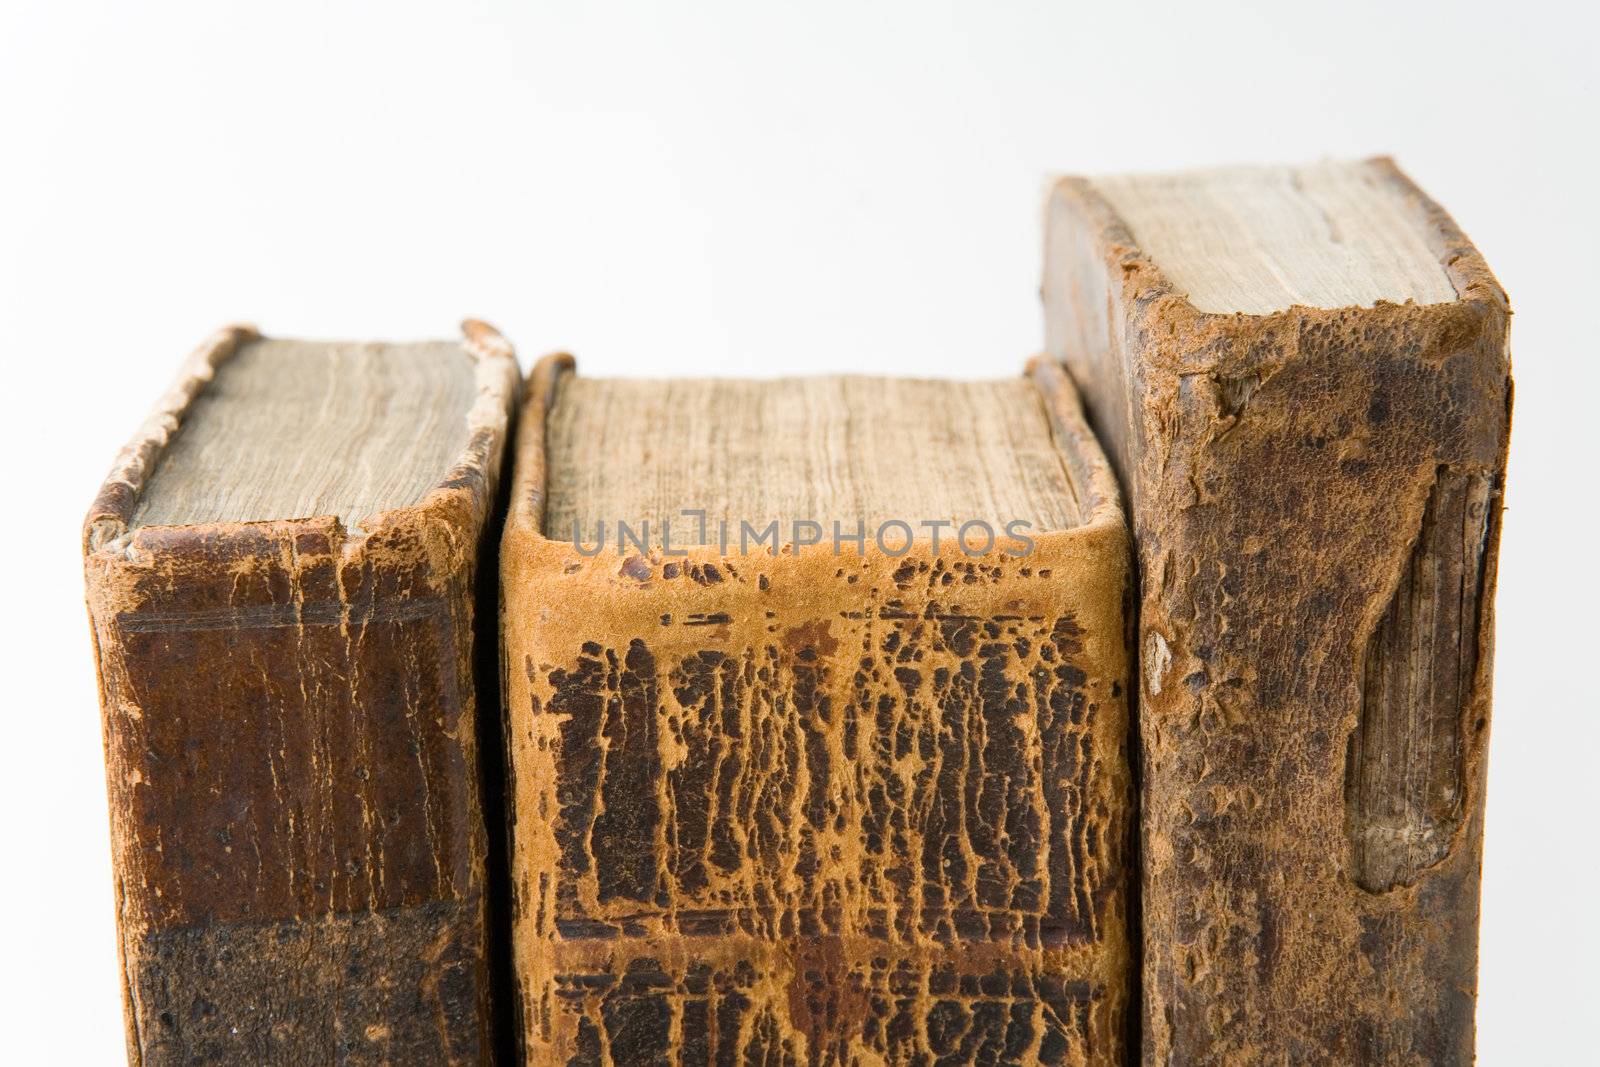 Antique Books by Luminis